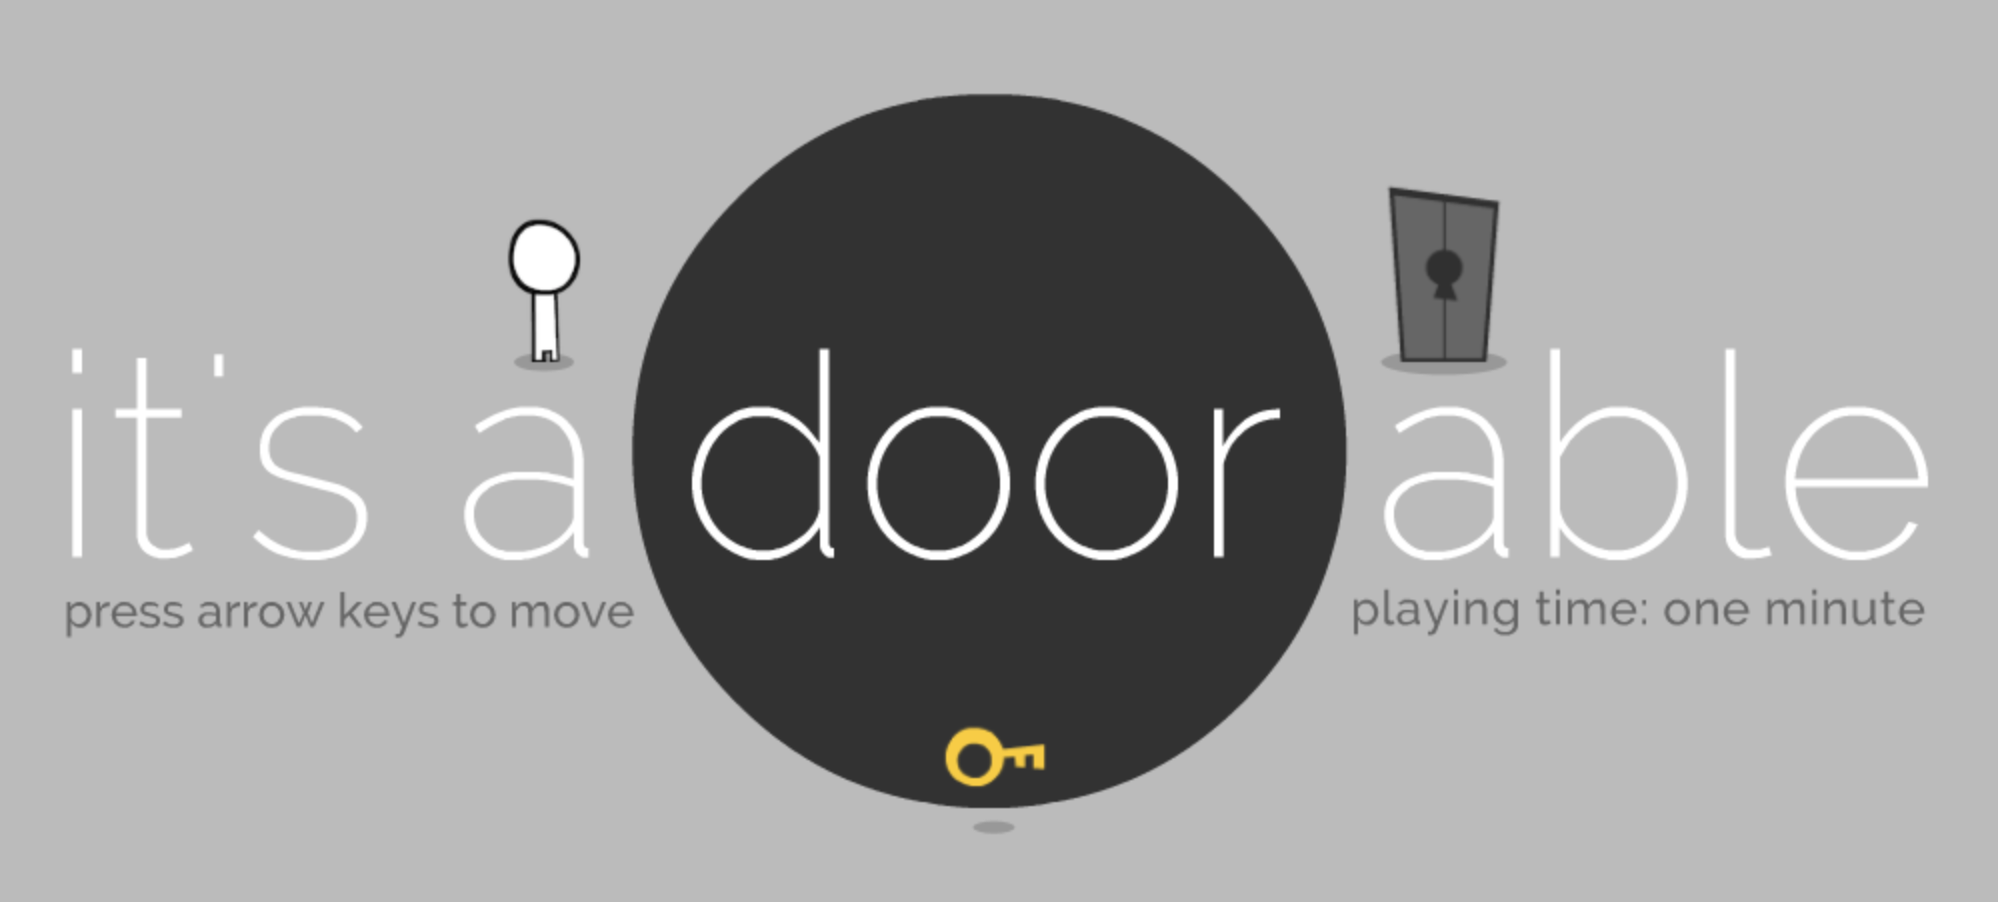 Screen of a game showing a tiny character — "it's a doorable"